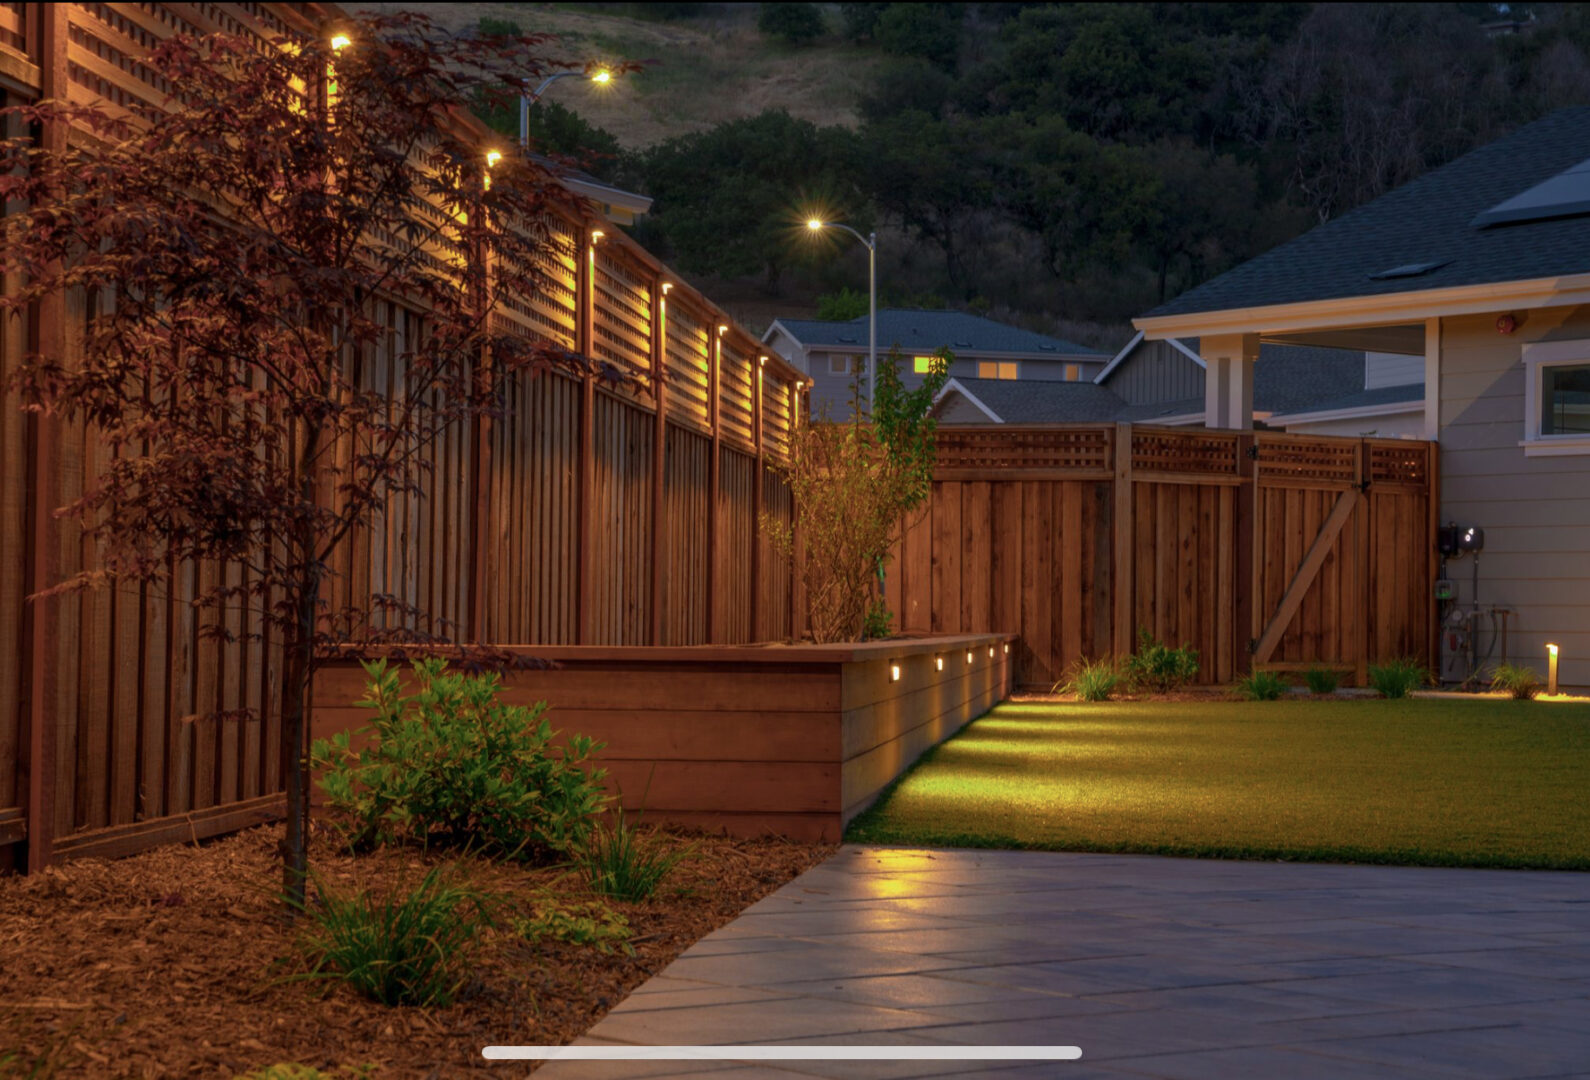 Tiles, pebbles, path lights, landscaping by Guys Yard Design in Sonoma, CA